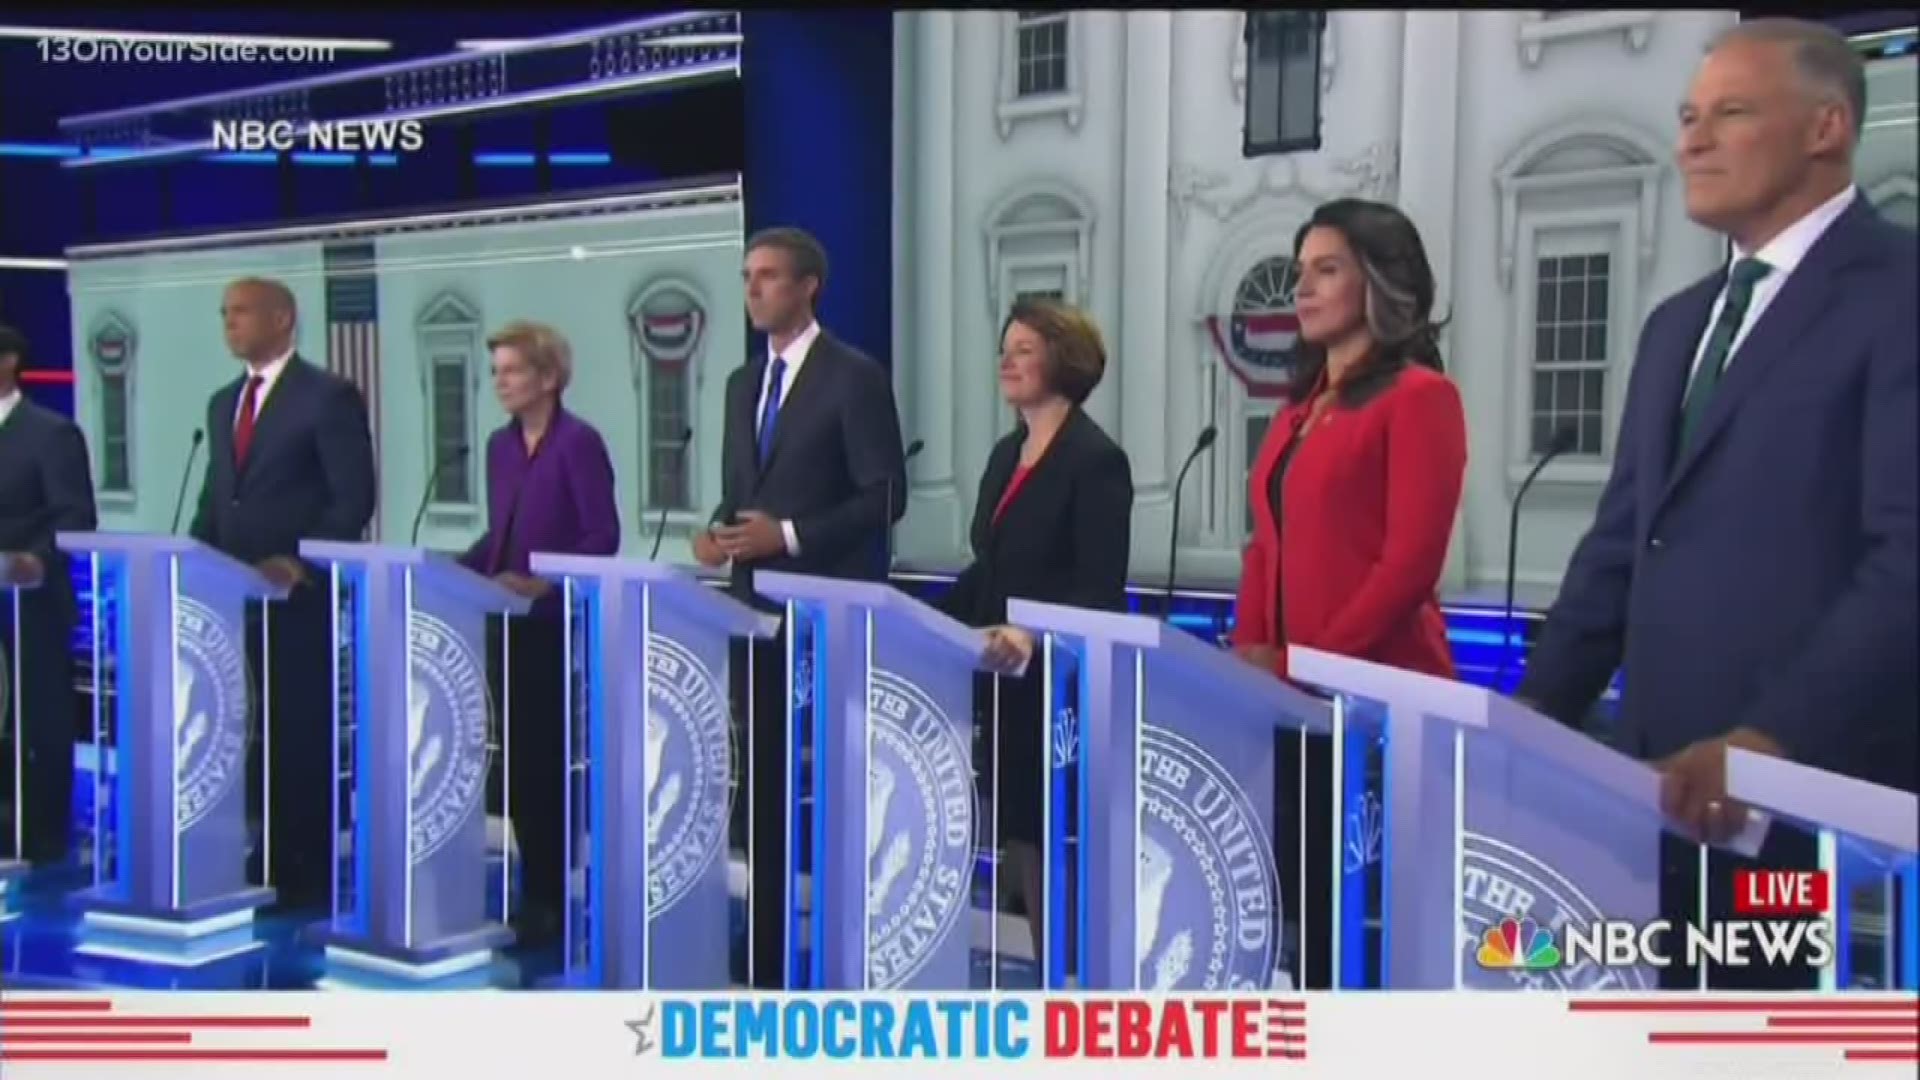 Audio problems disrupted the Democratic Debate Wednesday night. President Trump took to Twitter to give his take on the event and declared the debate "boring."